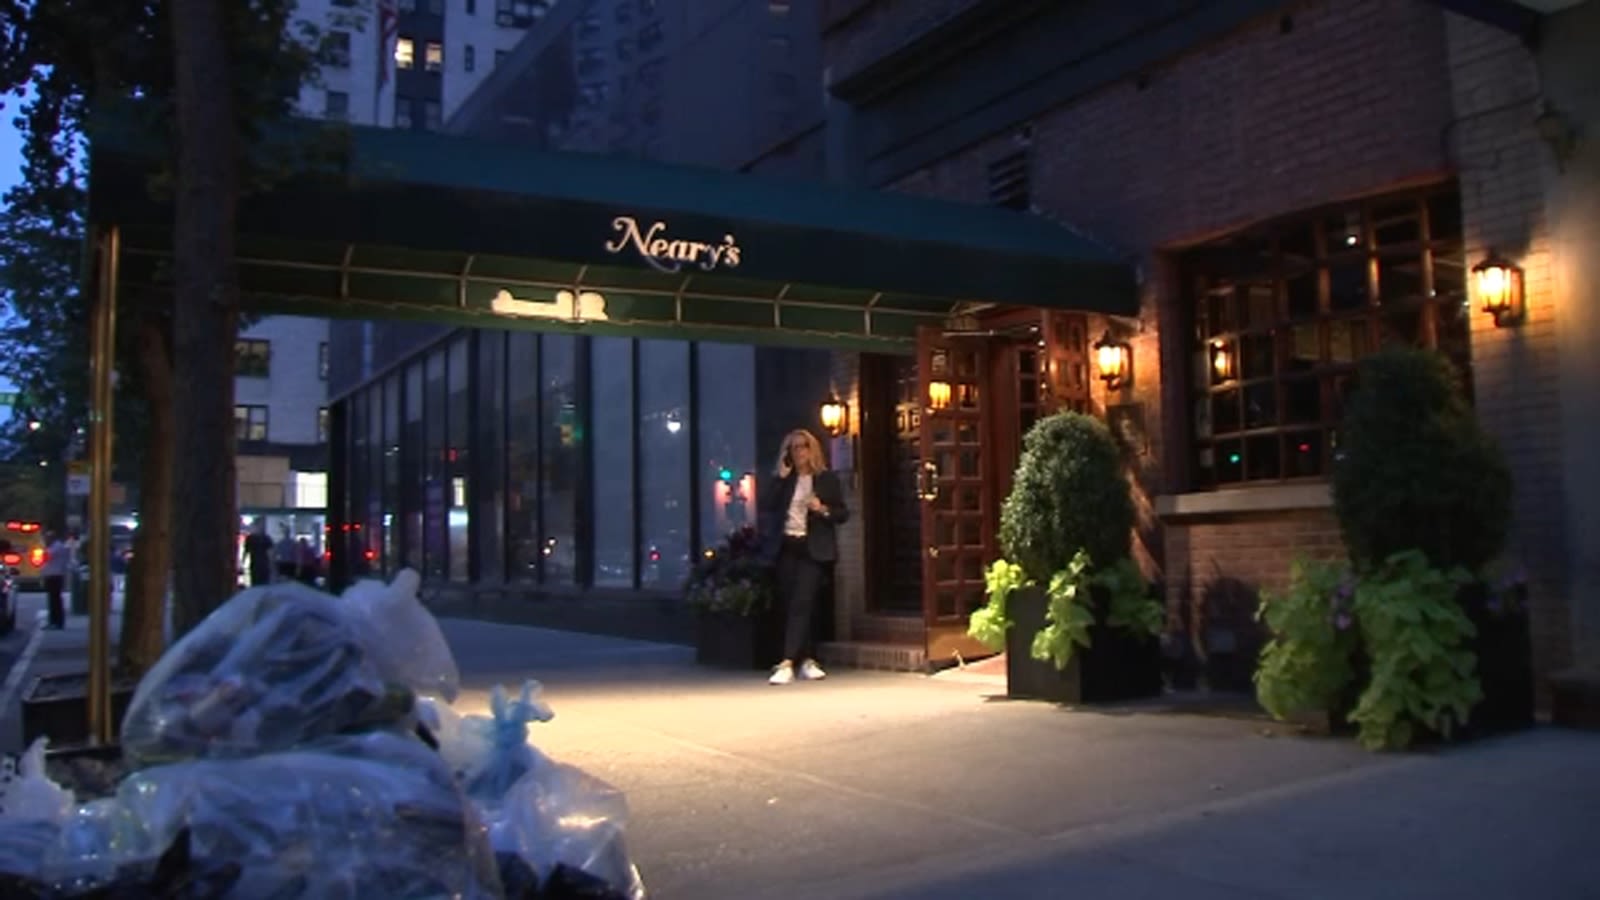 Irish pub Neary's is closing after 57 years in business in Midtown